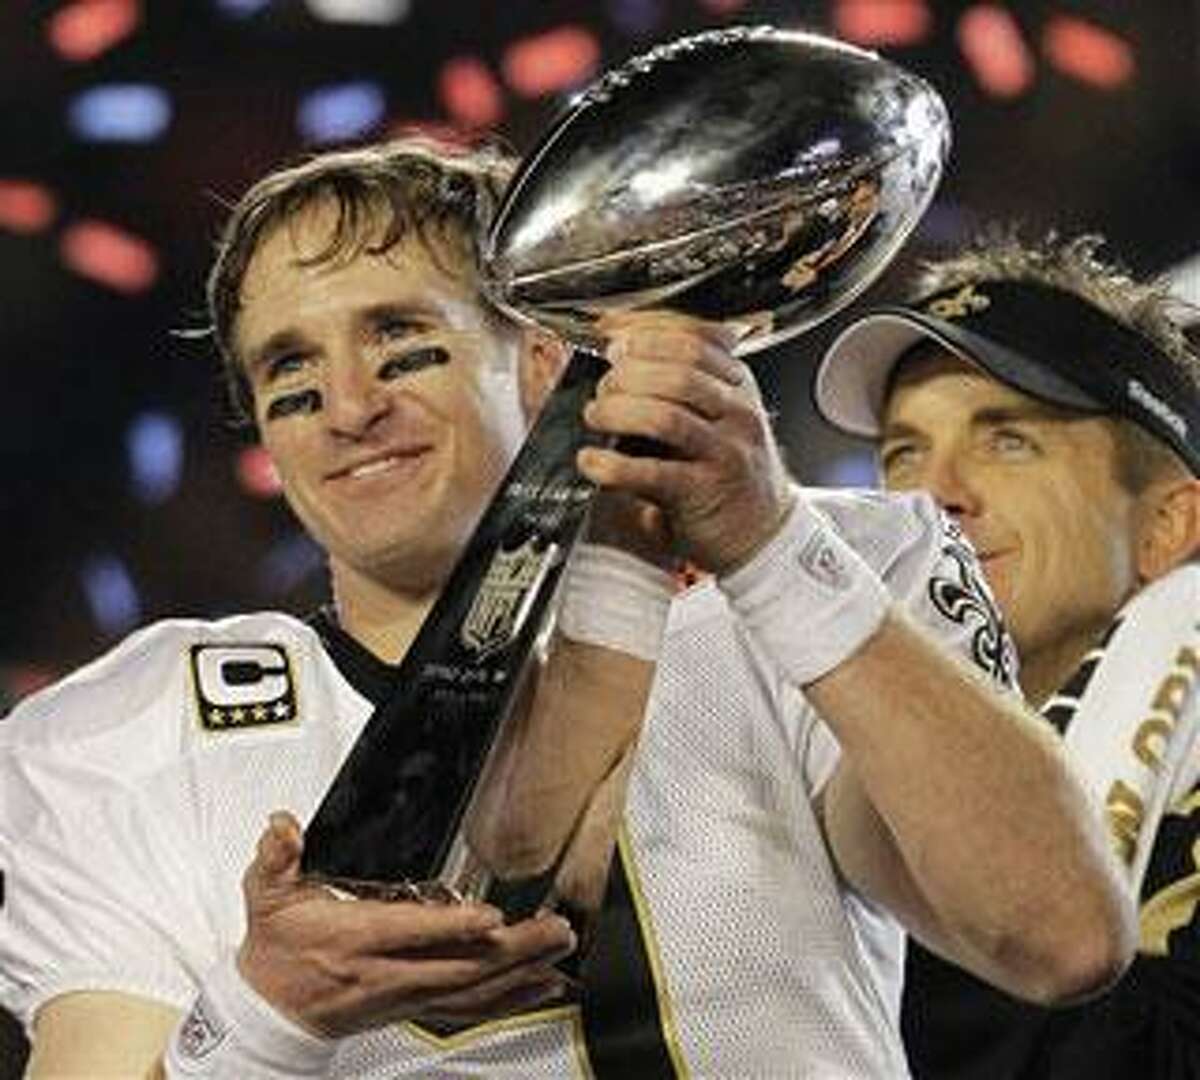 Saints win Super Bowl, end 43 years of frustration